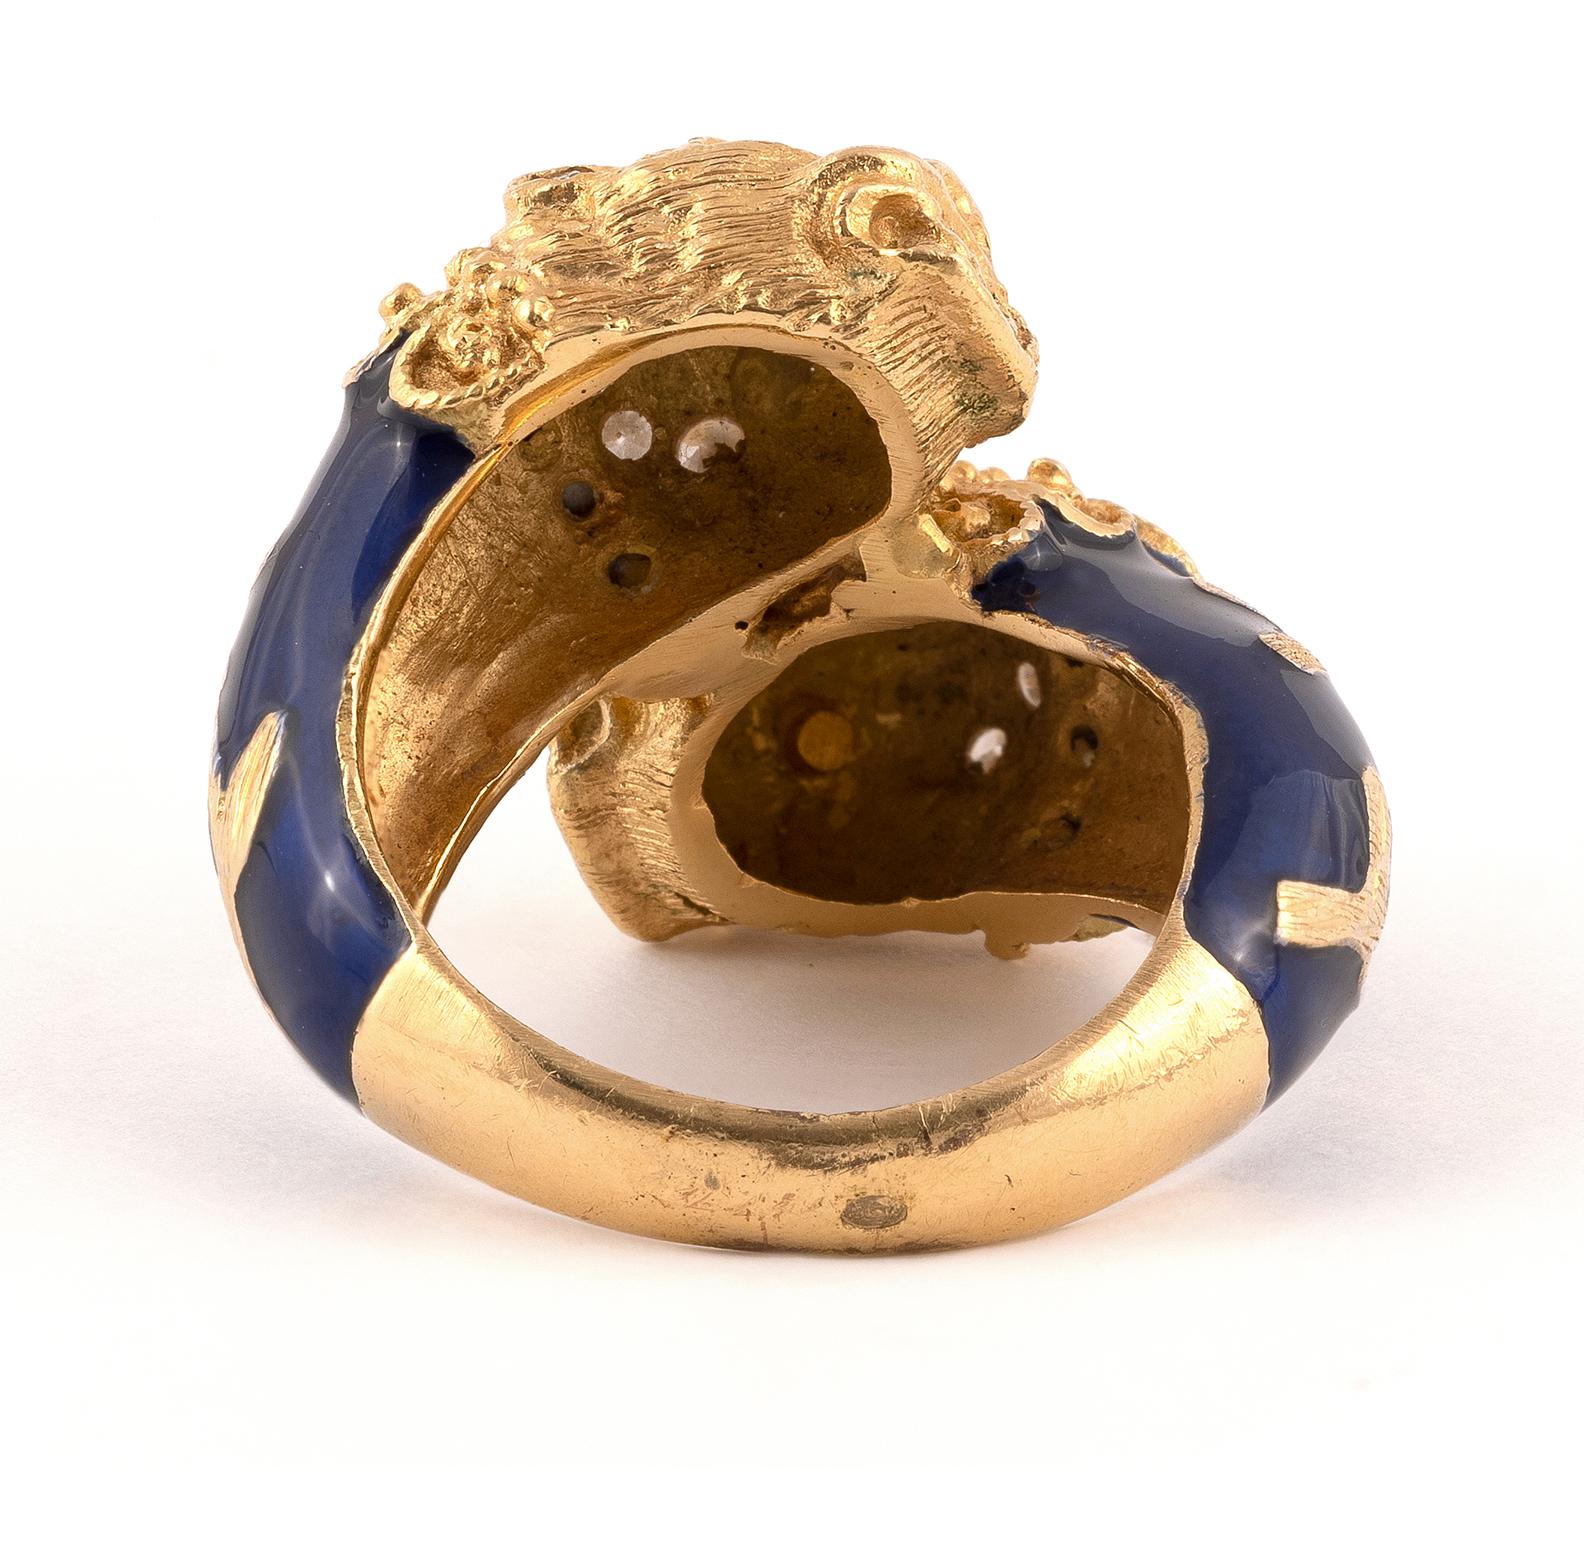 The textured ring with opposing lion's head terminals, each with circular-cut diamond eyes, rose-cut diamond and blue enamel.
Size 8
Weight: 14,7gr.
